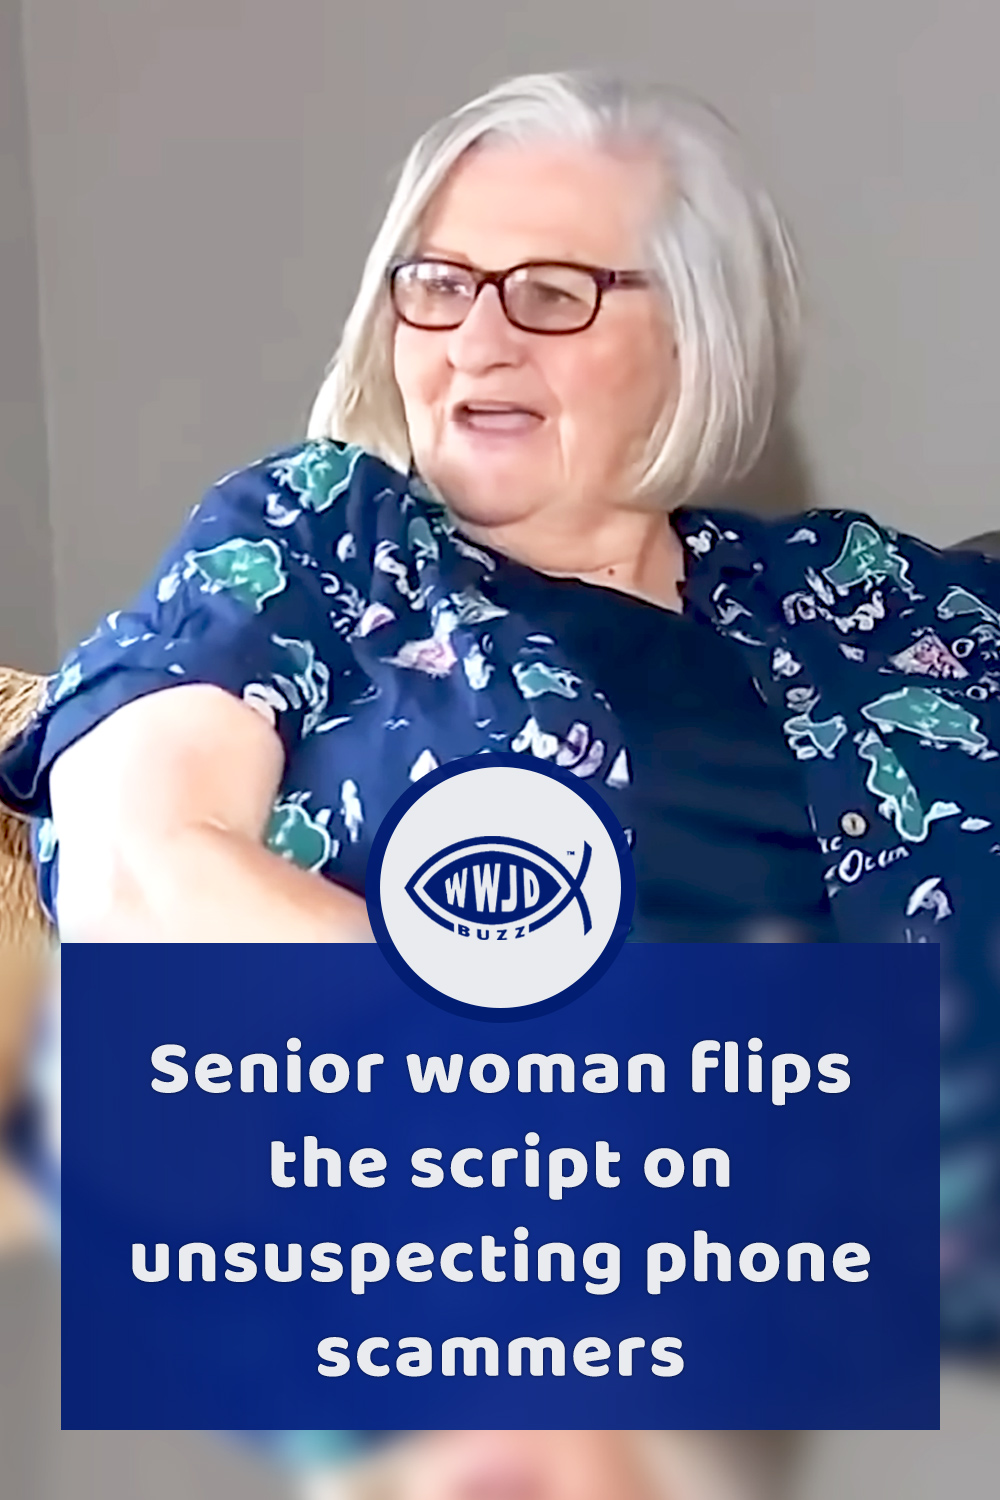 Senior woman flips the script on unsuspecting phone scammers